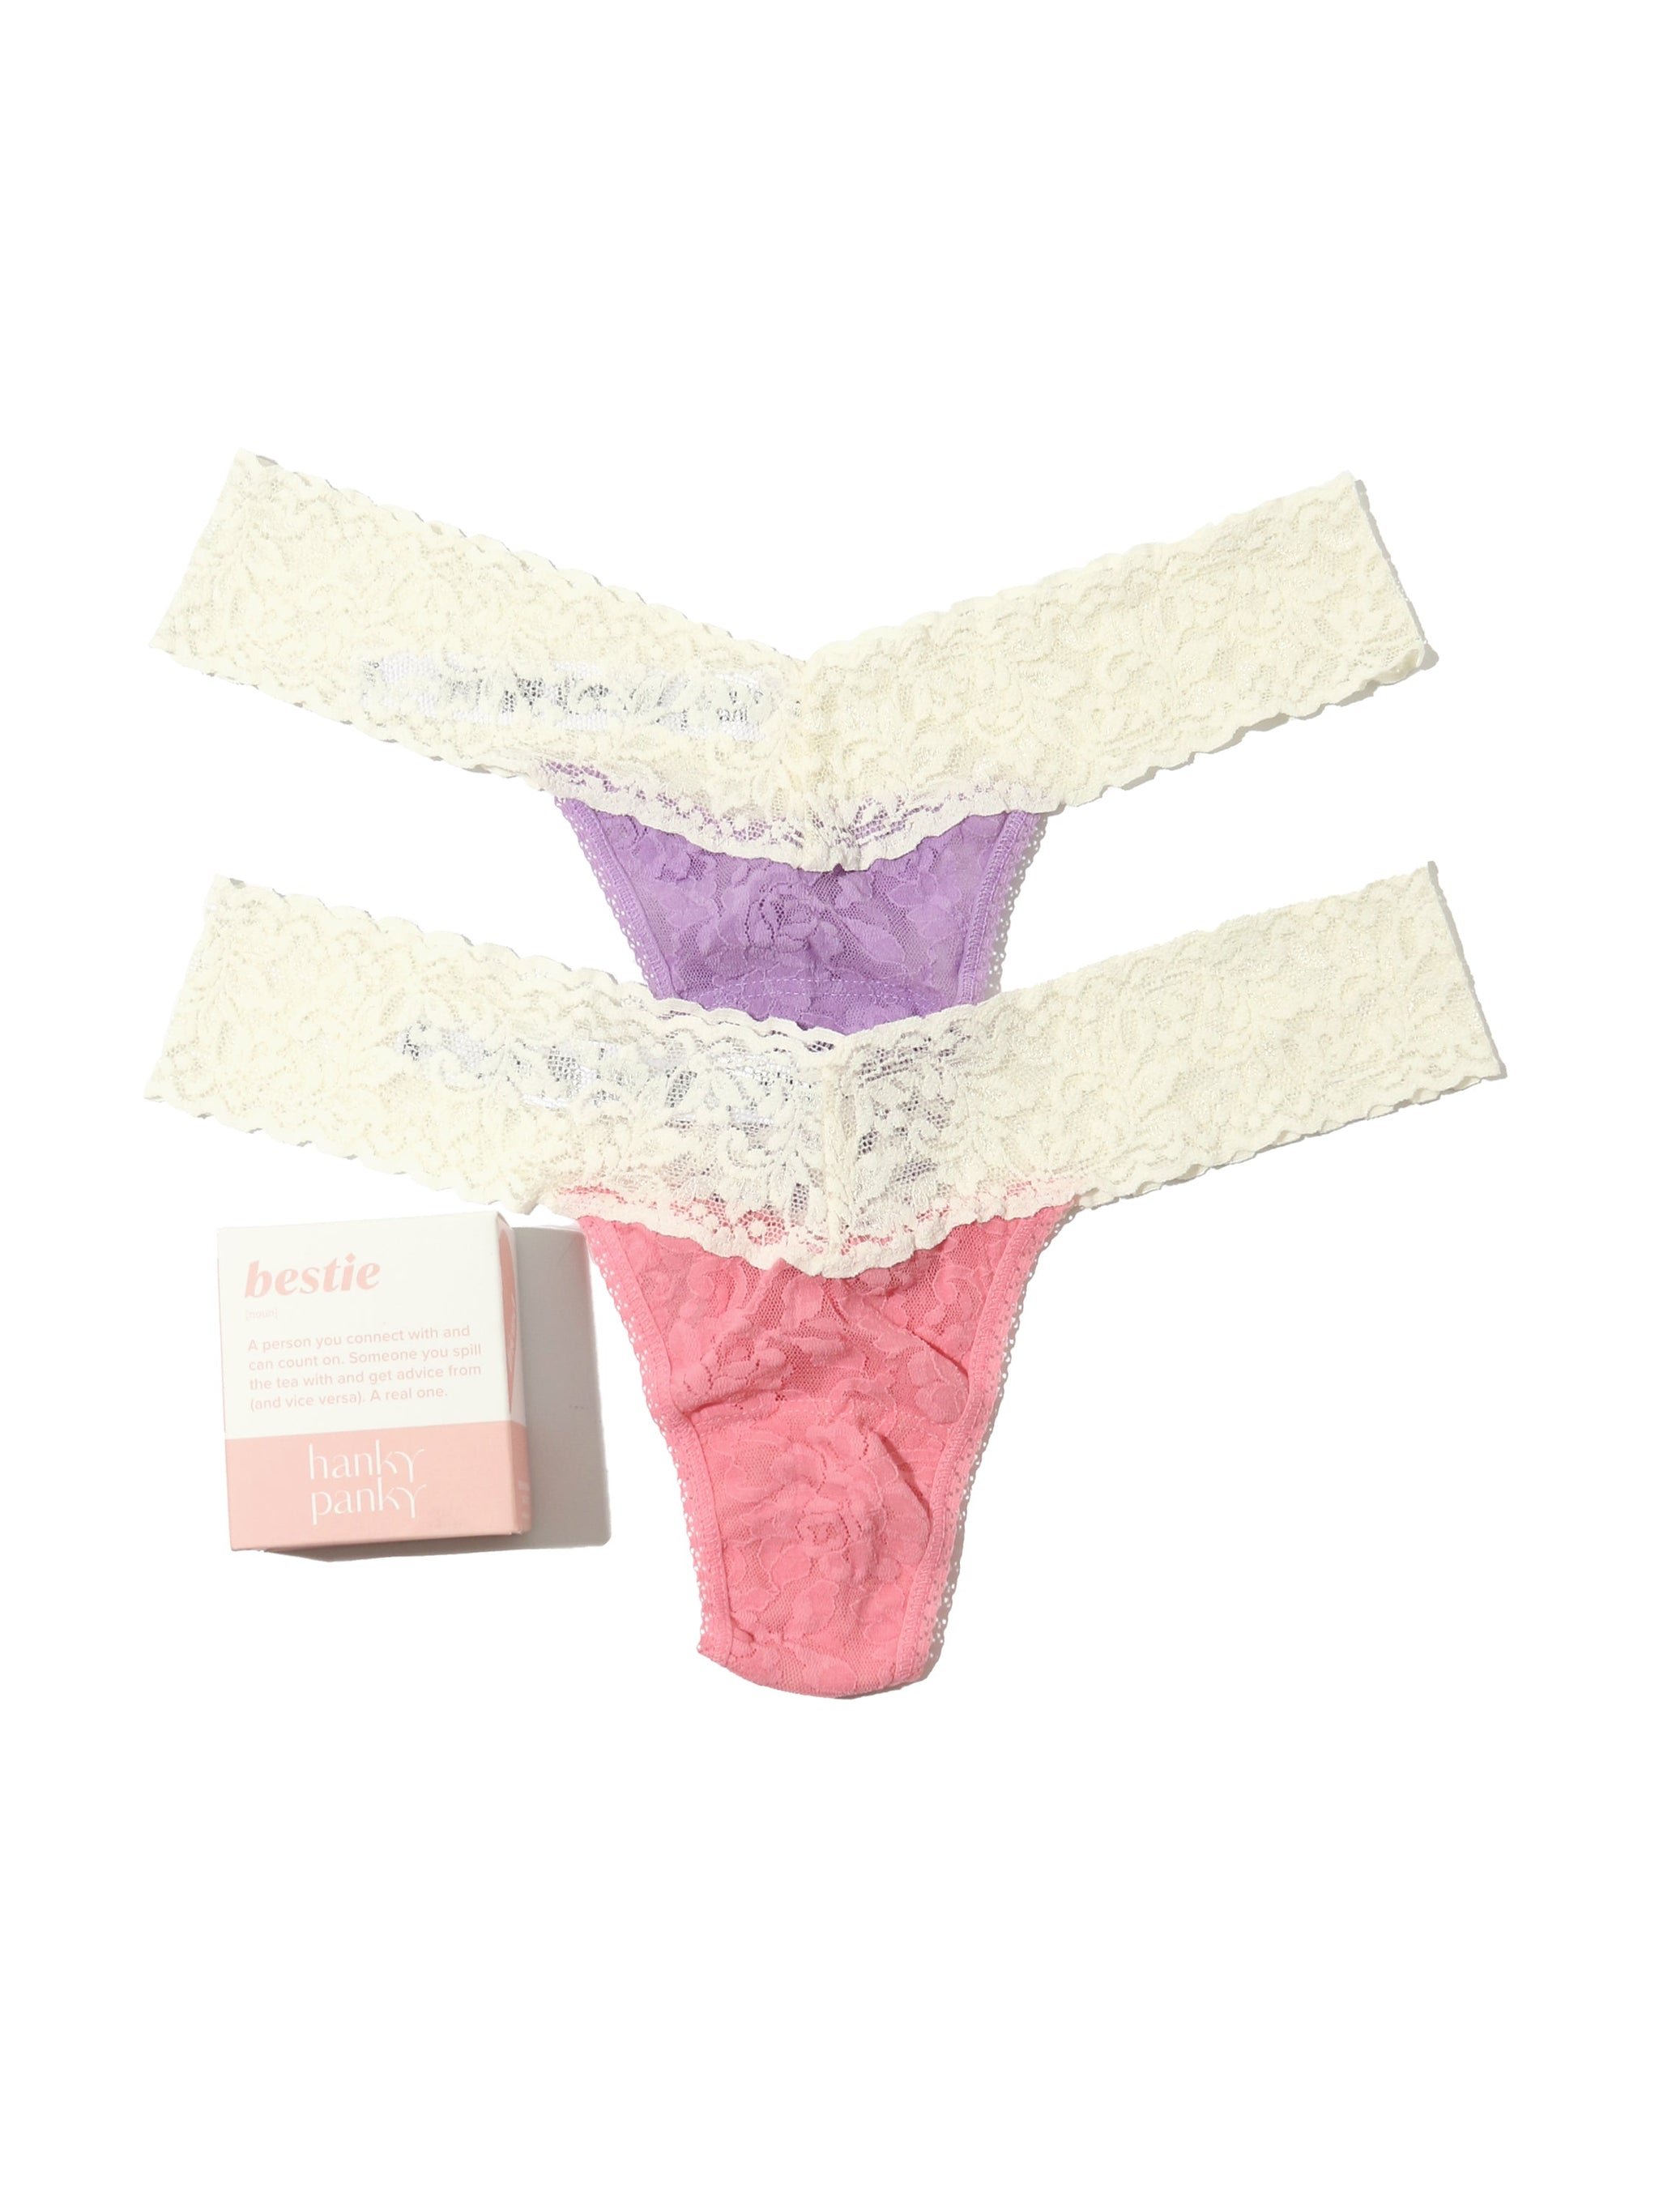 Bestie 2 Pack Low Rise Signature Lace Thongs in Box